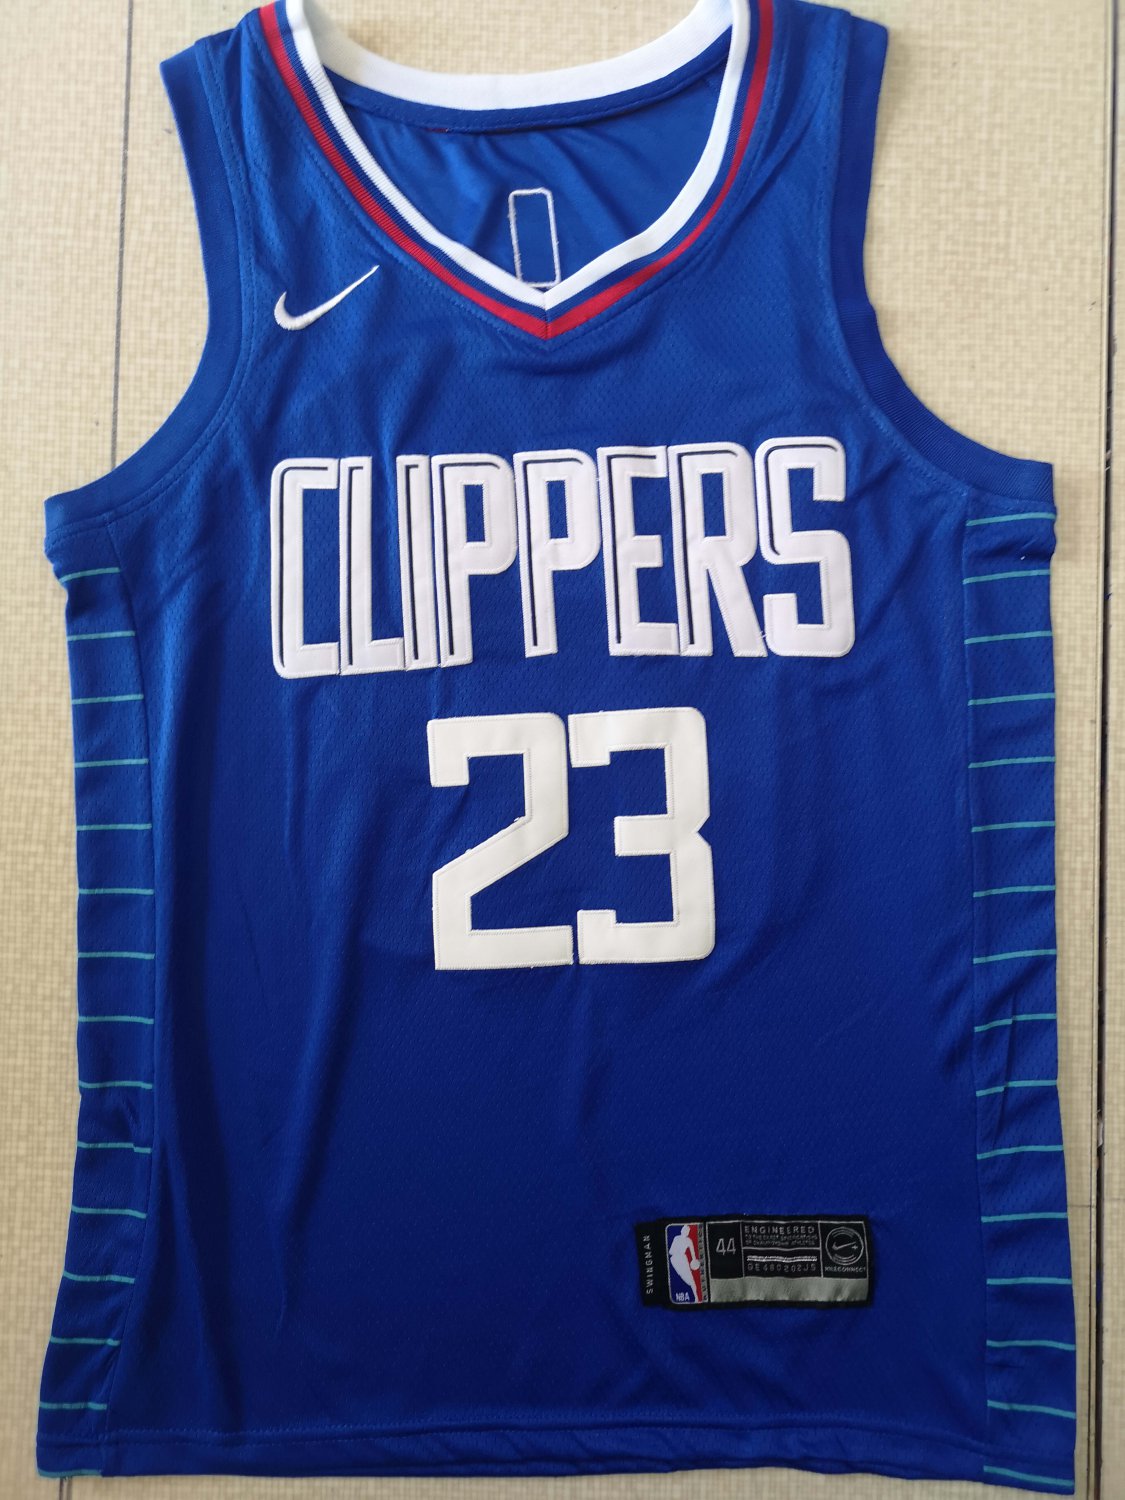 clippers new jerseys 2019